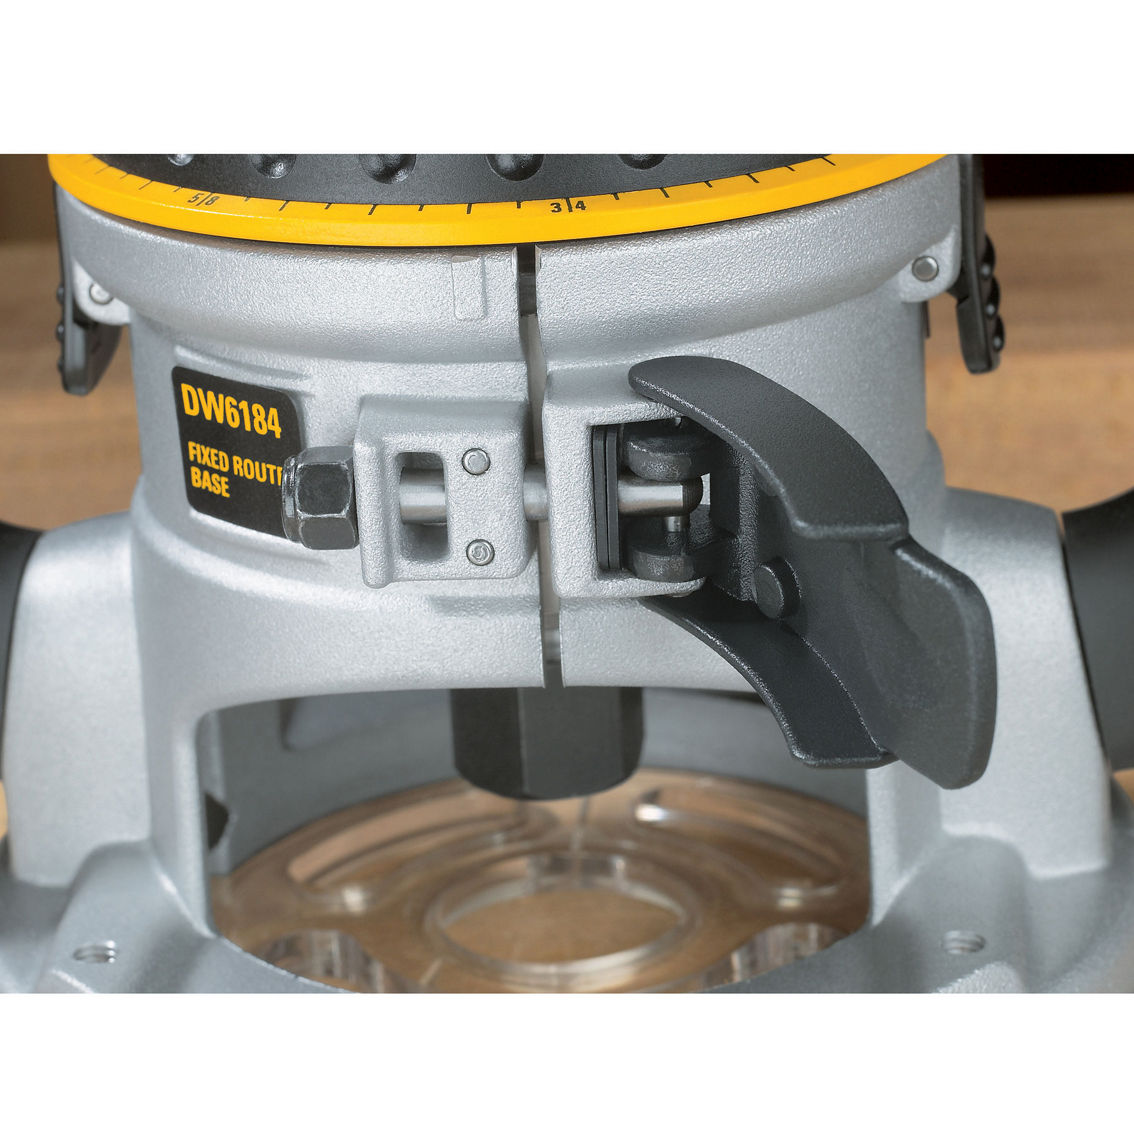 DeWalt 2-1/4 HP (maximum motor HP) EVS Fixed Base Router with Soft Start - Image 8 of 10